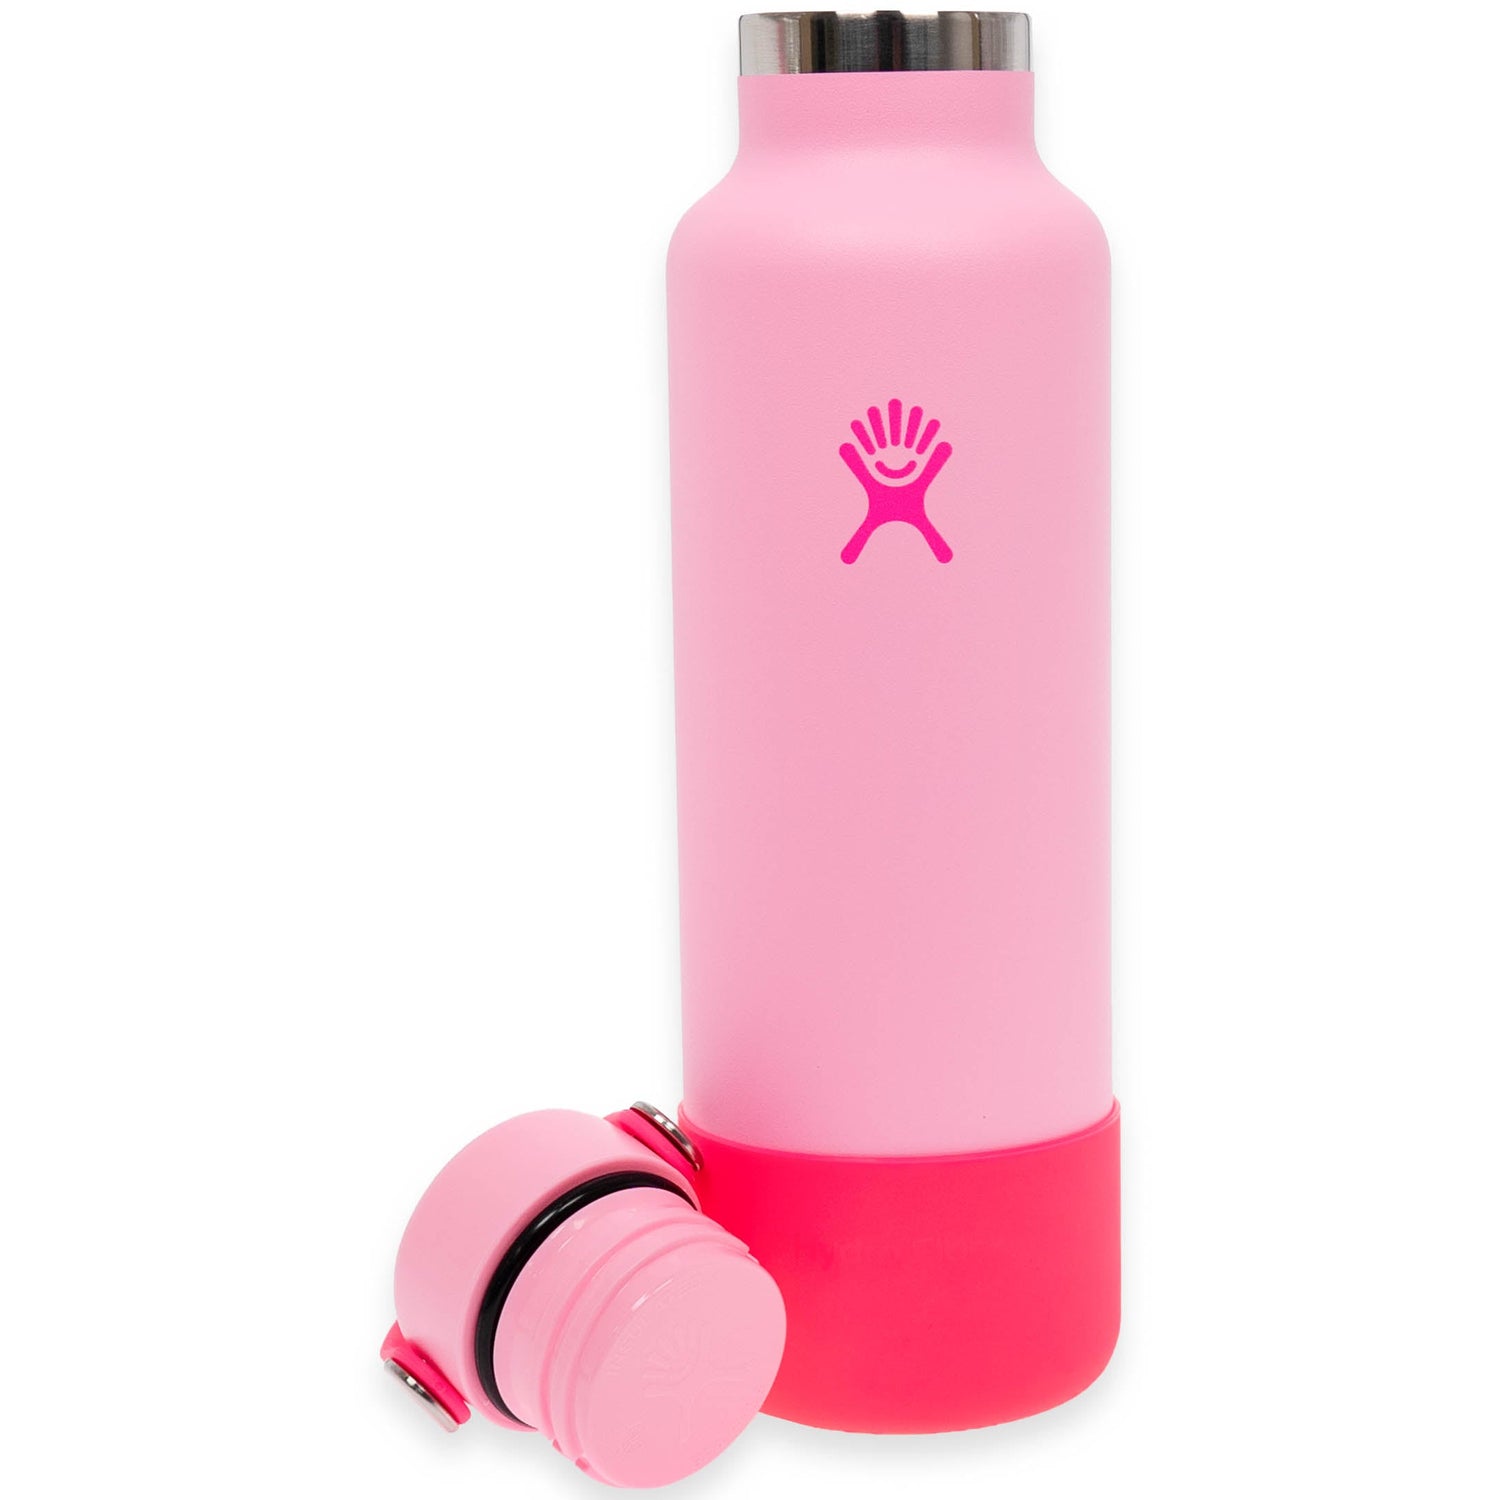 Prism Pop Limited Edition 21oz Neon Pink Hydro Flask Bottle